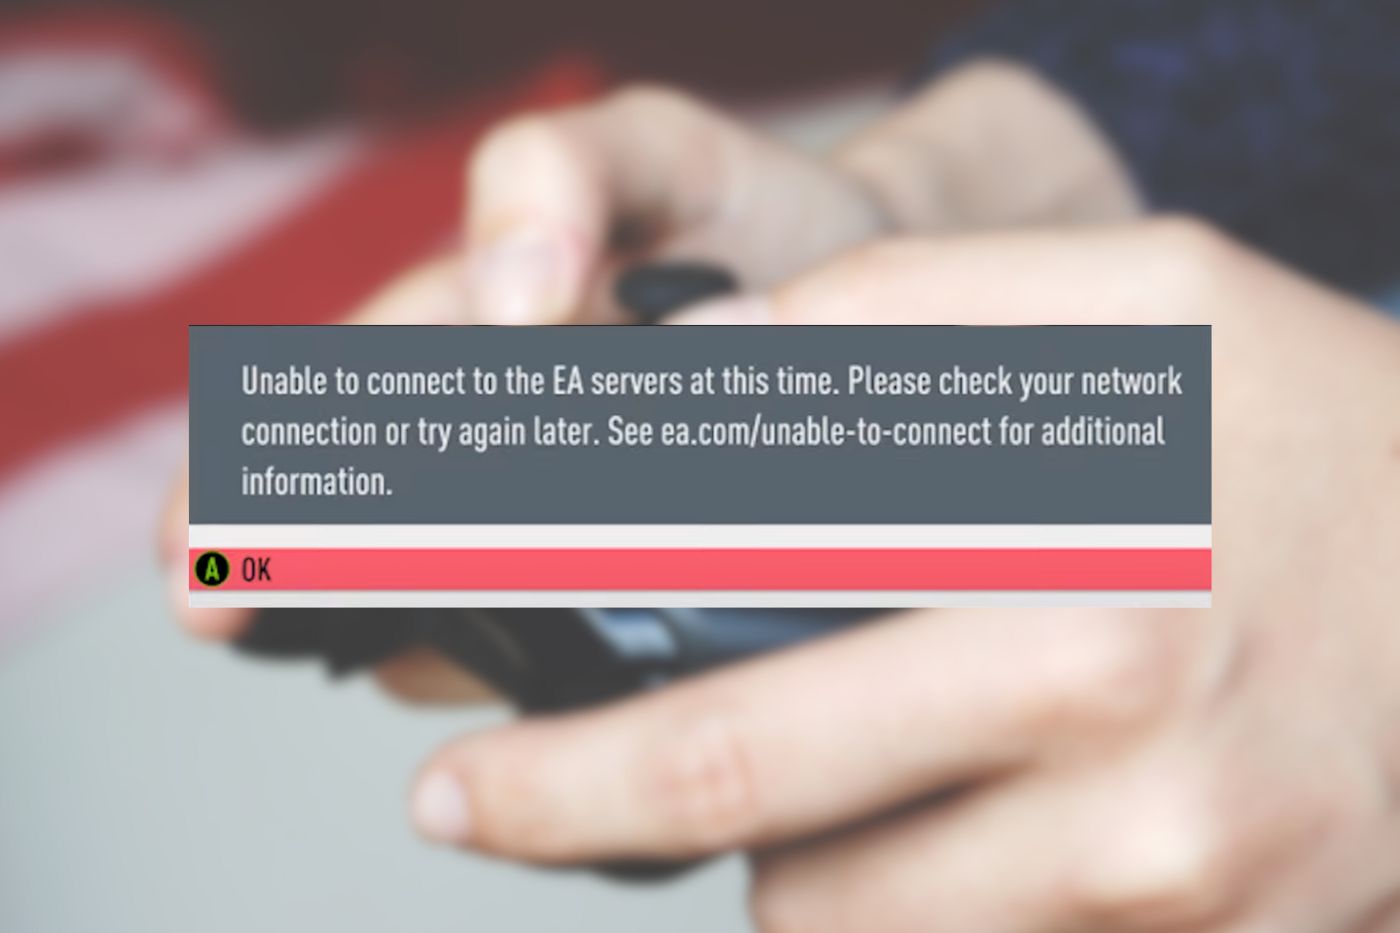 HOW TO FIX UNABLE TO CONNECT TO EA SERVERS ISSUE (PC/Console